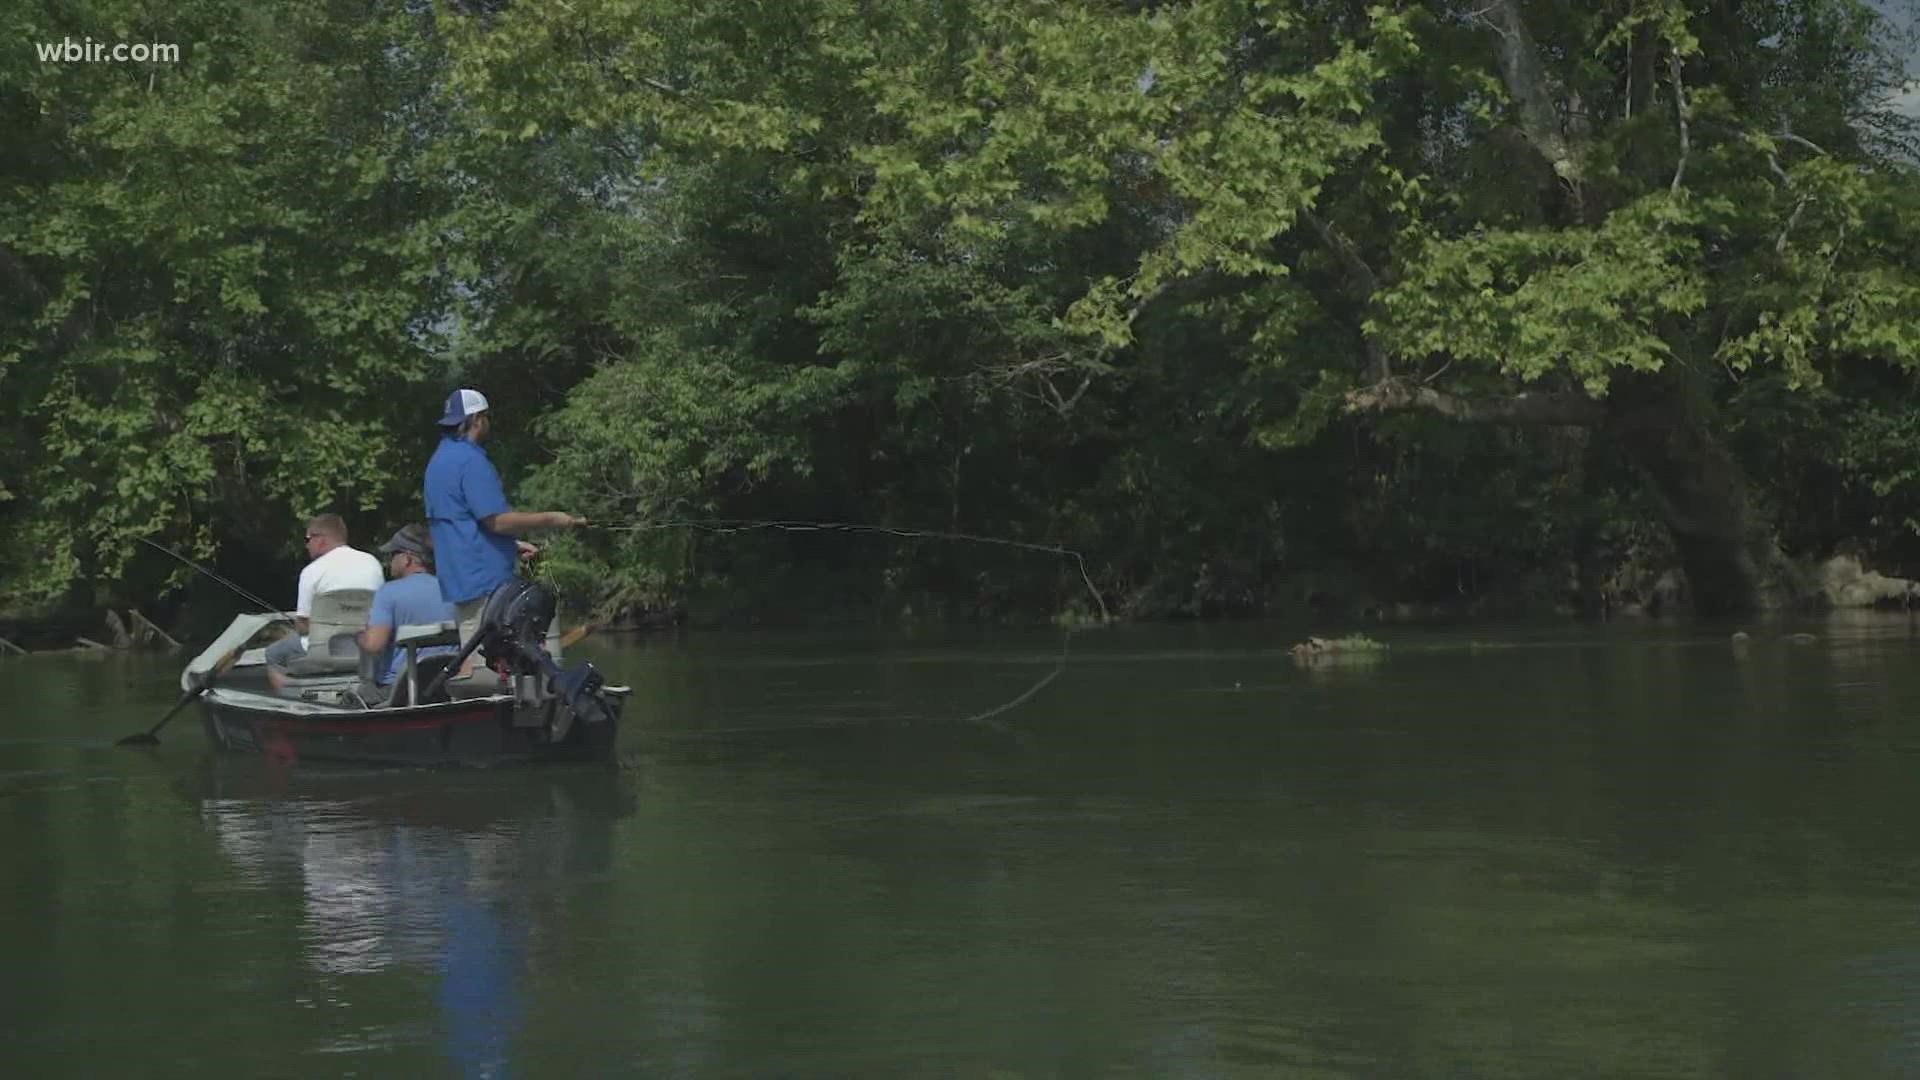 A fundraiser for cystic fibrosis research brought anglers to the Clinch River on Saturday.